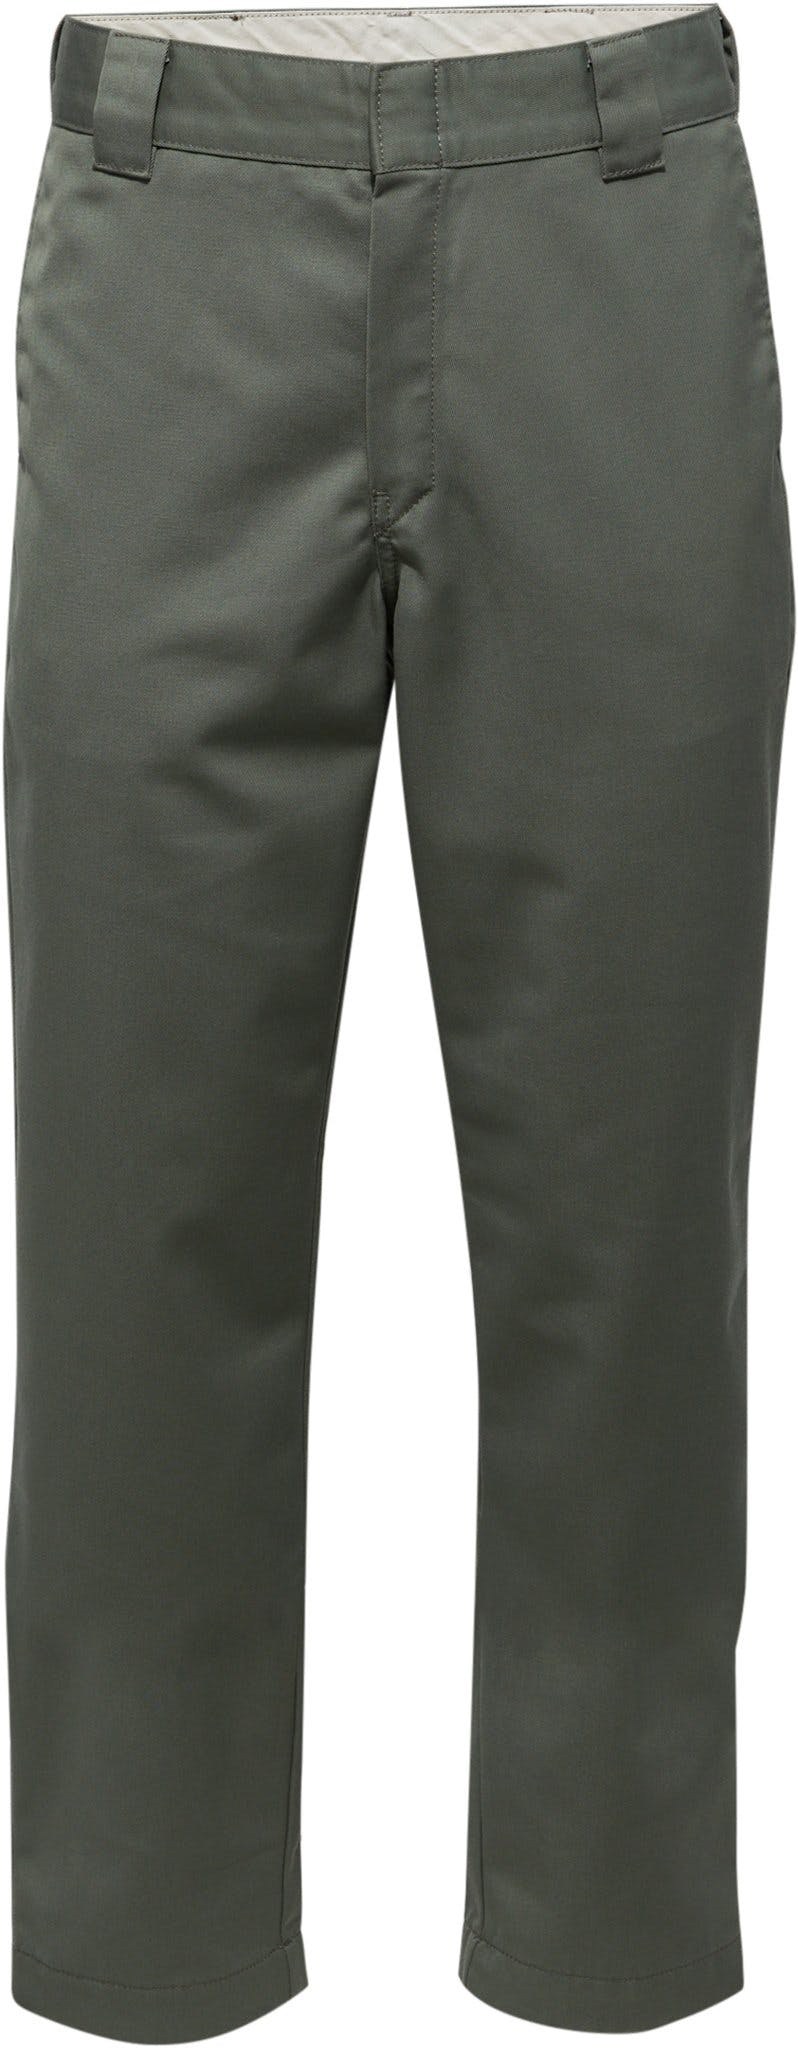 Product image for Master Pant - Men's